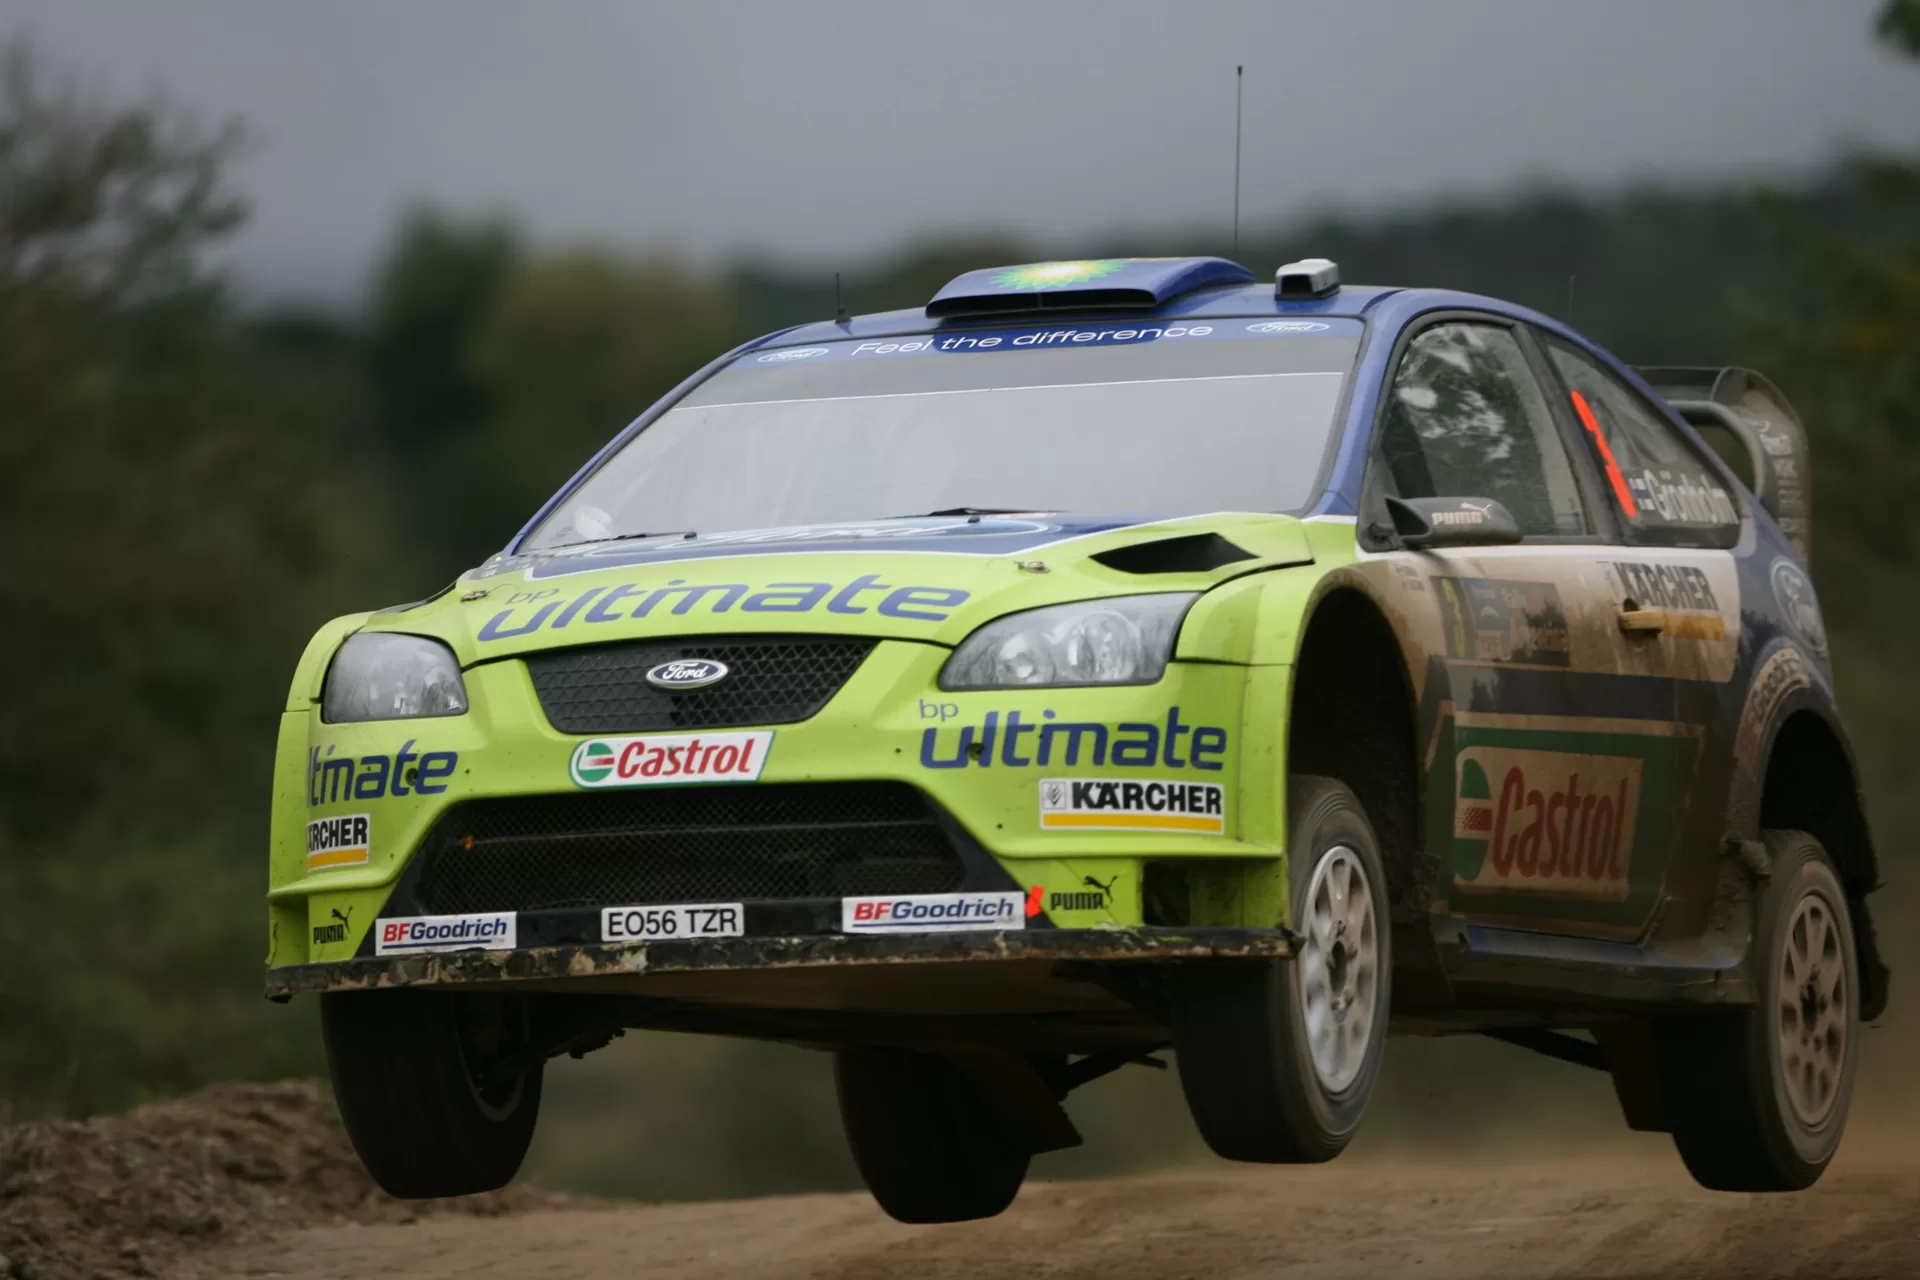 Ford Focus Rally Car WRC – Blue Oval Victory in Rallying缩略图